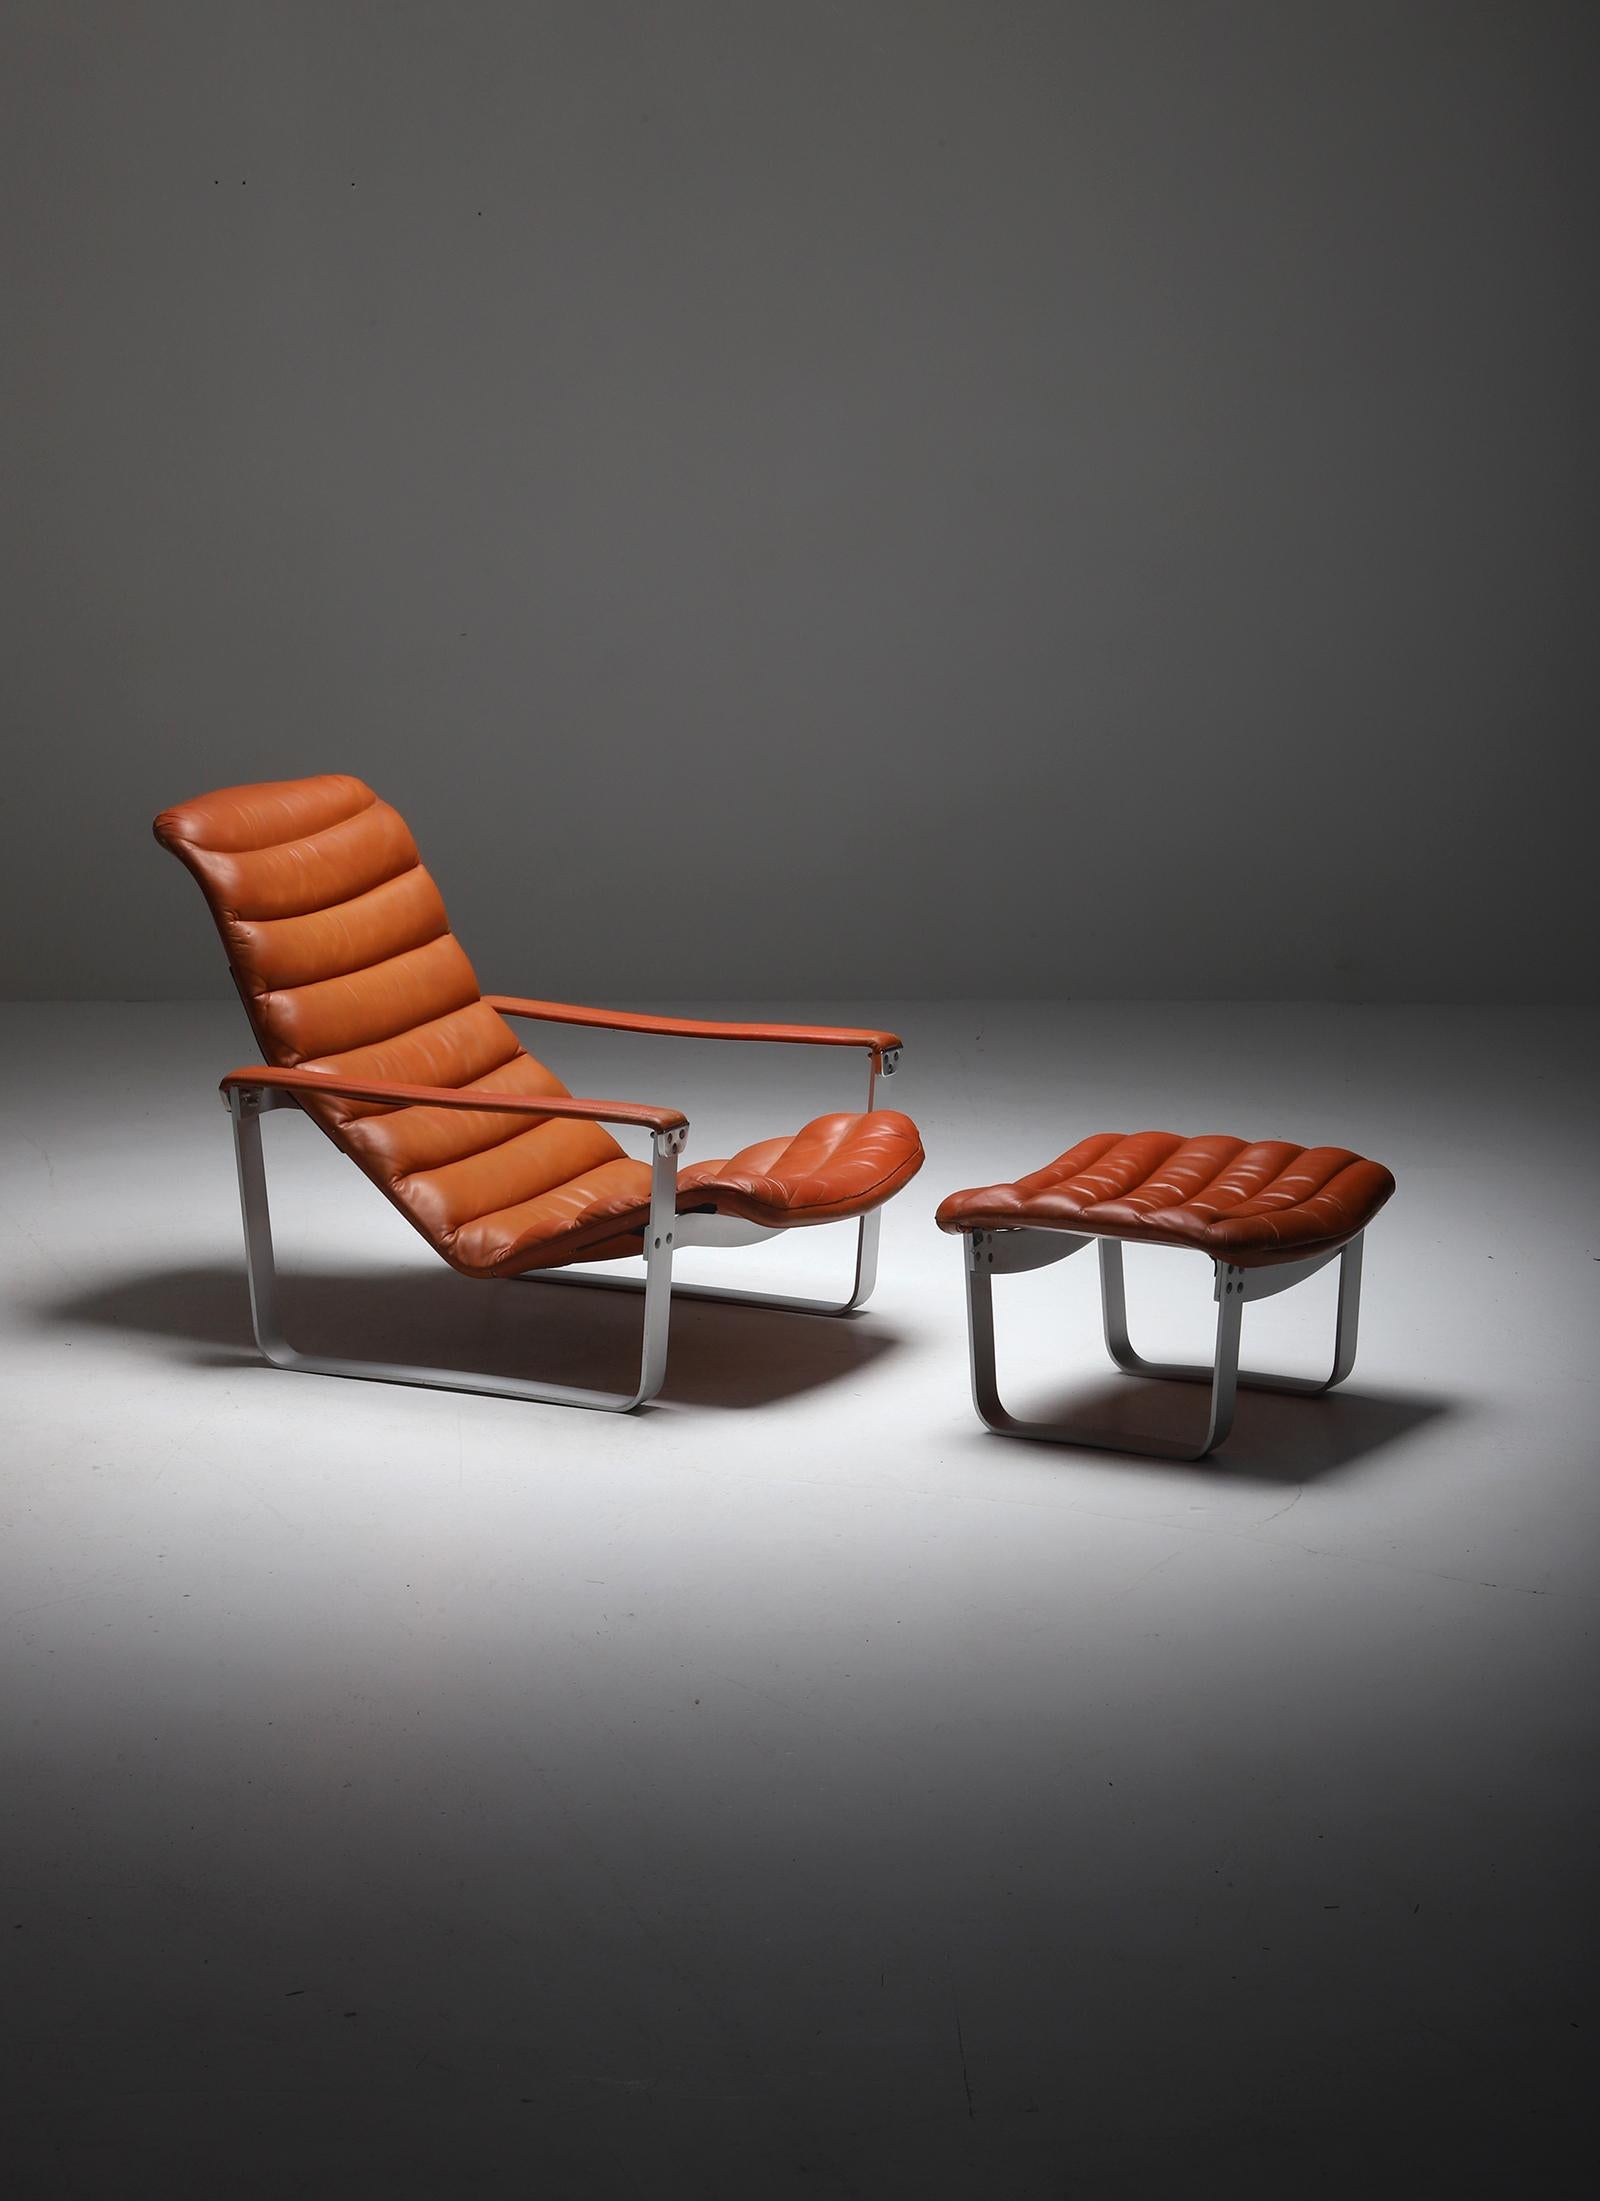 Lounge chair with Ottoman designed by Ilmari Lappalainen For Asko 1960s. Both items have an aluminum base and are upholstered in a dark cognac, brown gradient color leather, which has gained a beautiful patina over the years. The seating is